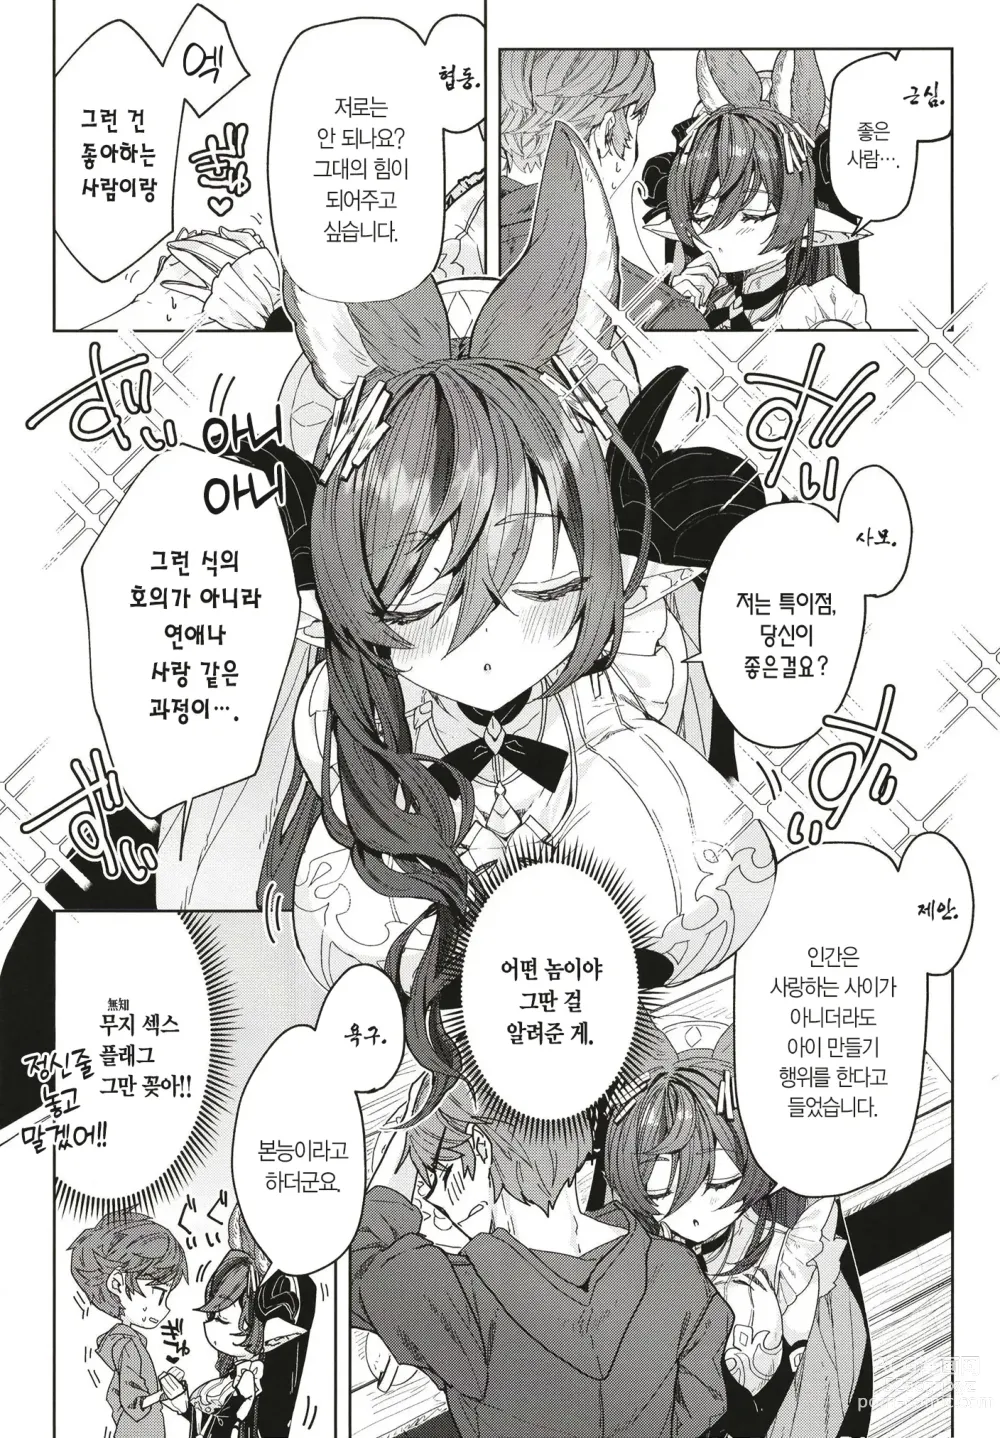 Page 6 of doujinshi 『금』의 축복